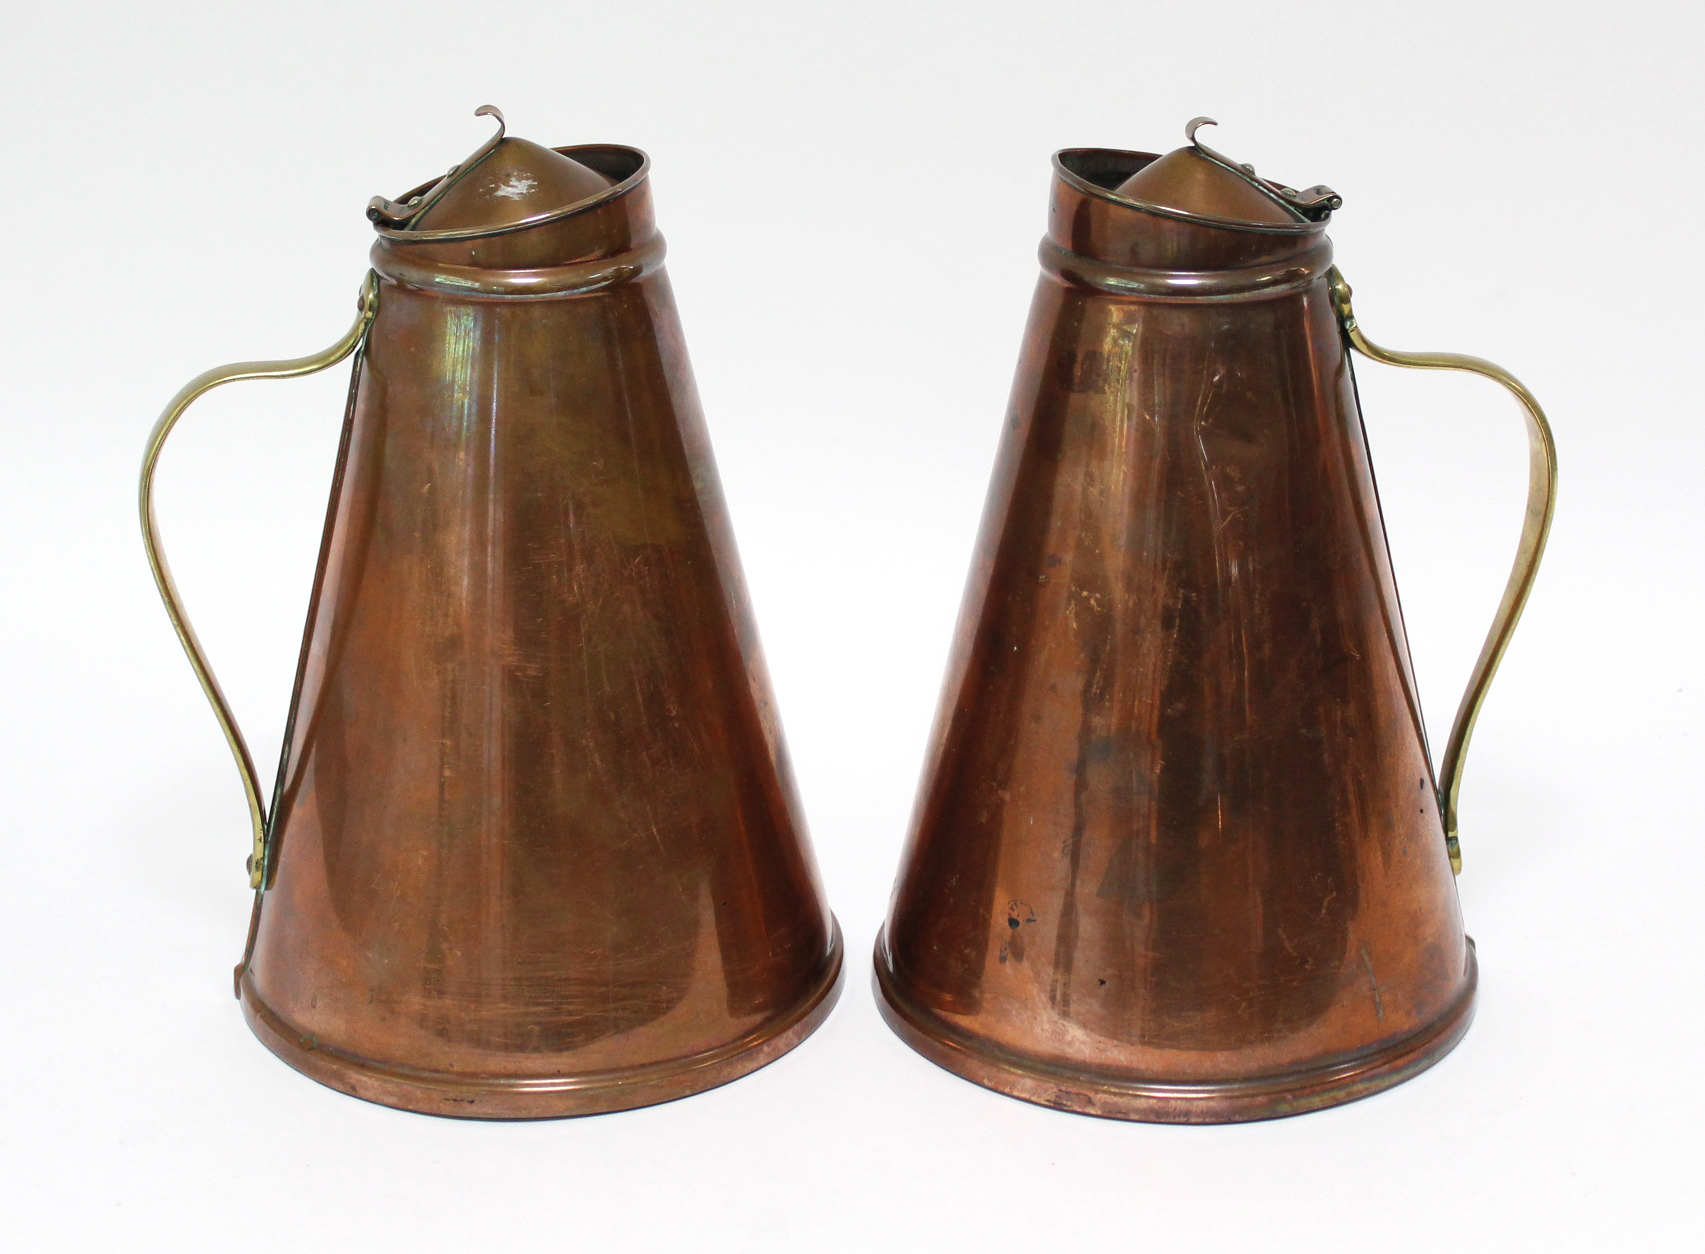 A pair of W. A. S. Benson Arts & Crafts copper “Jacketed Jugs” of tapered cylindrical form, with